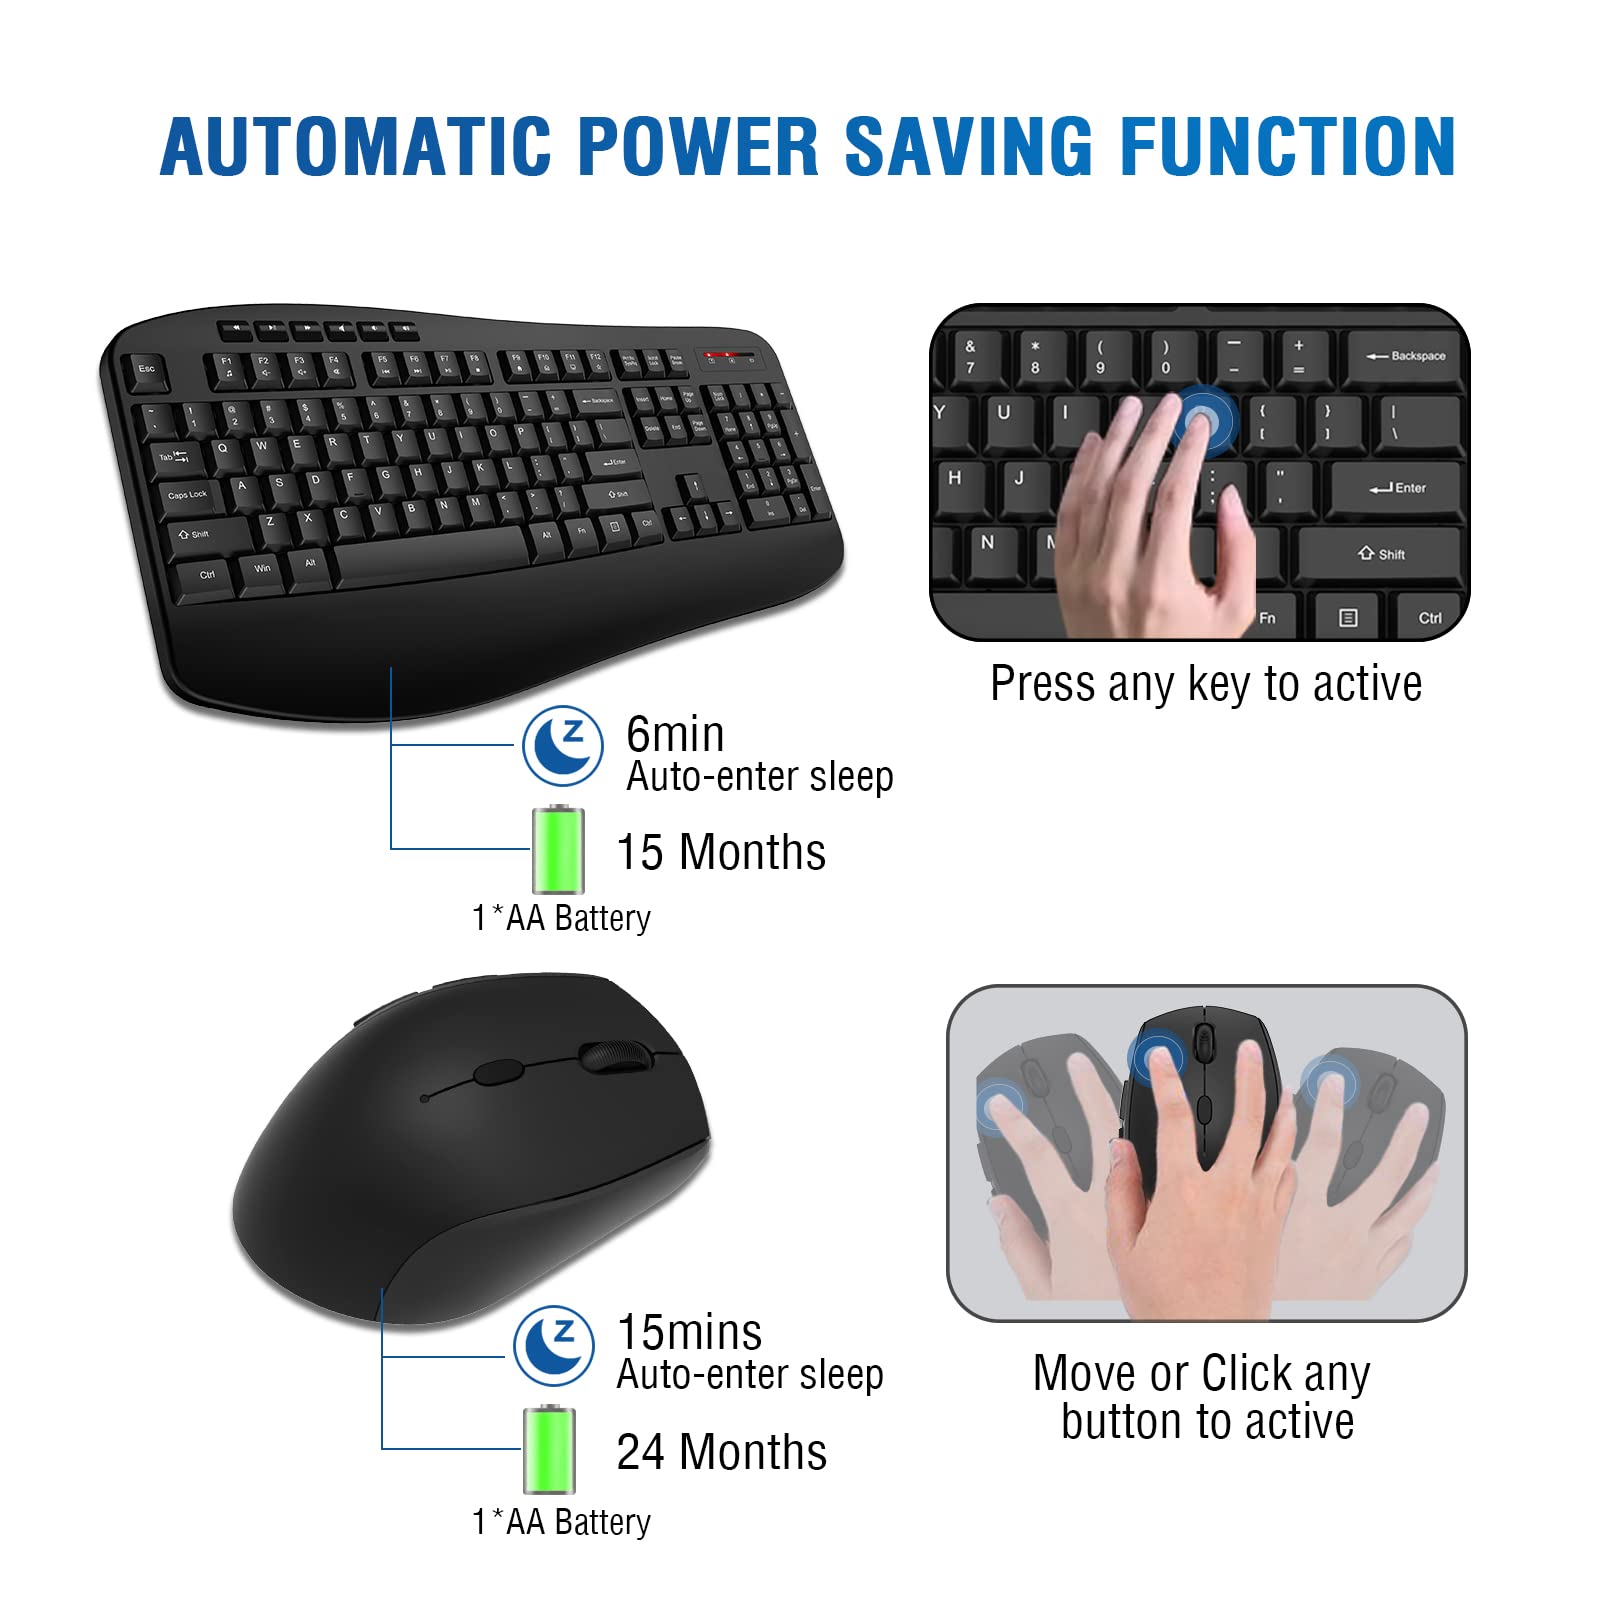 Wireless Keyboard Mouse Combo, EDJO 2.4G Full-Sized Large Wireless Keyboard with Comfortable Palm Rest and Optical Wireless Mouse for Windows, Mac OS PC/Desktops/Computer/Laptops